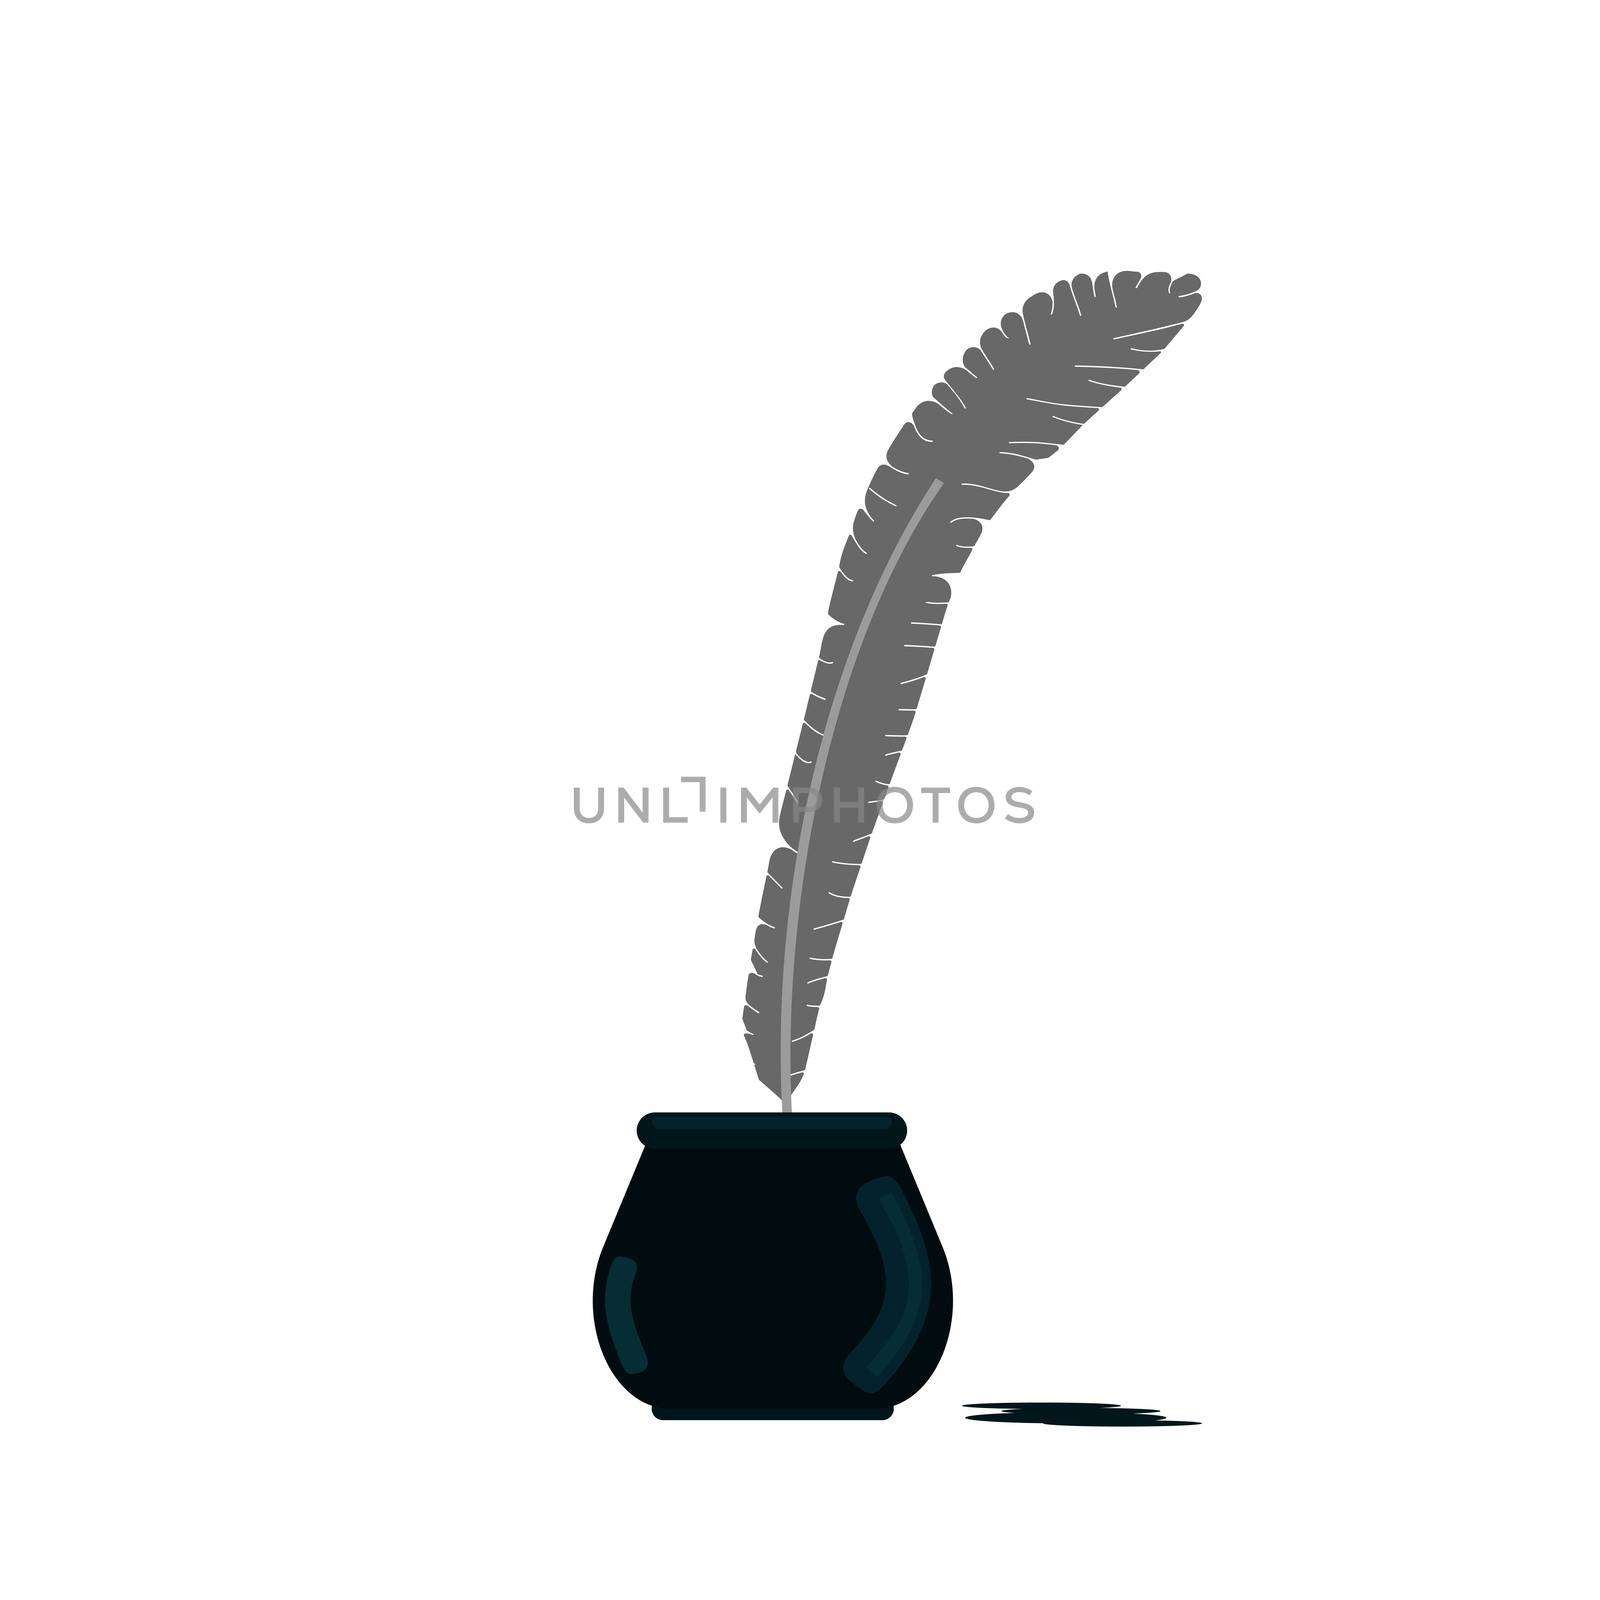 Ink with pen icon isolated on white background illustration.